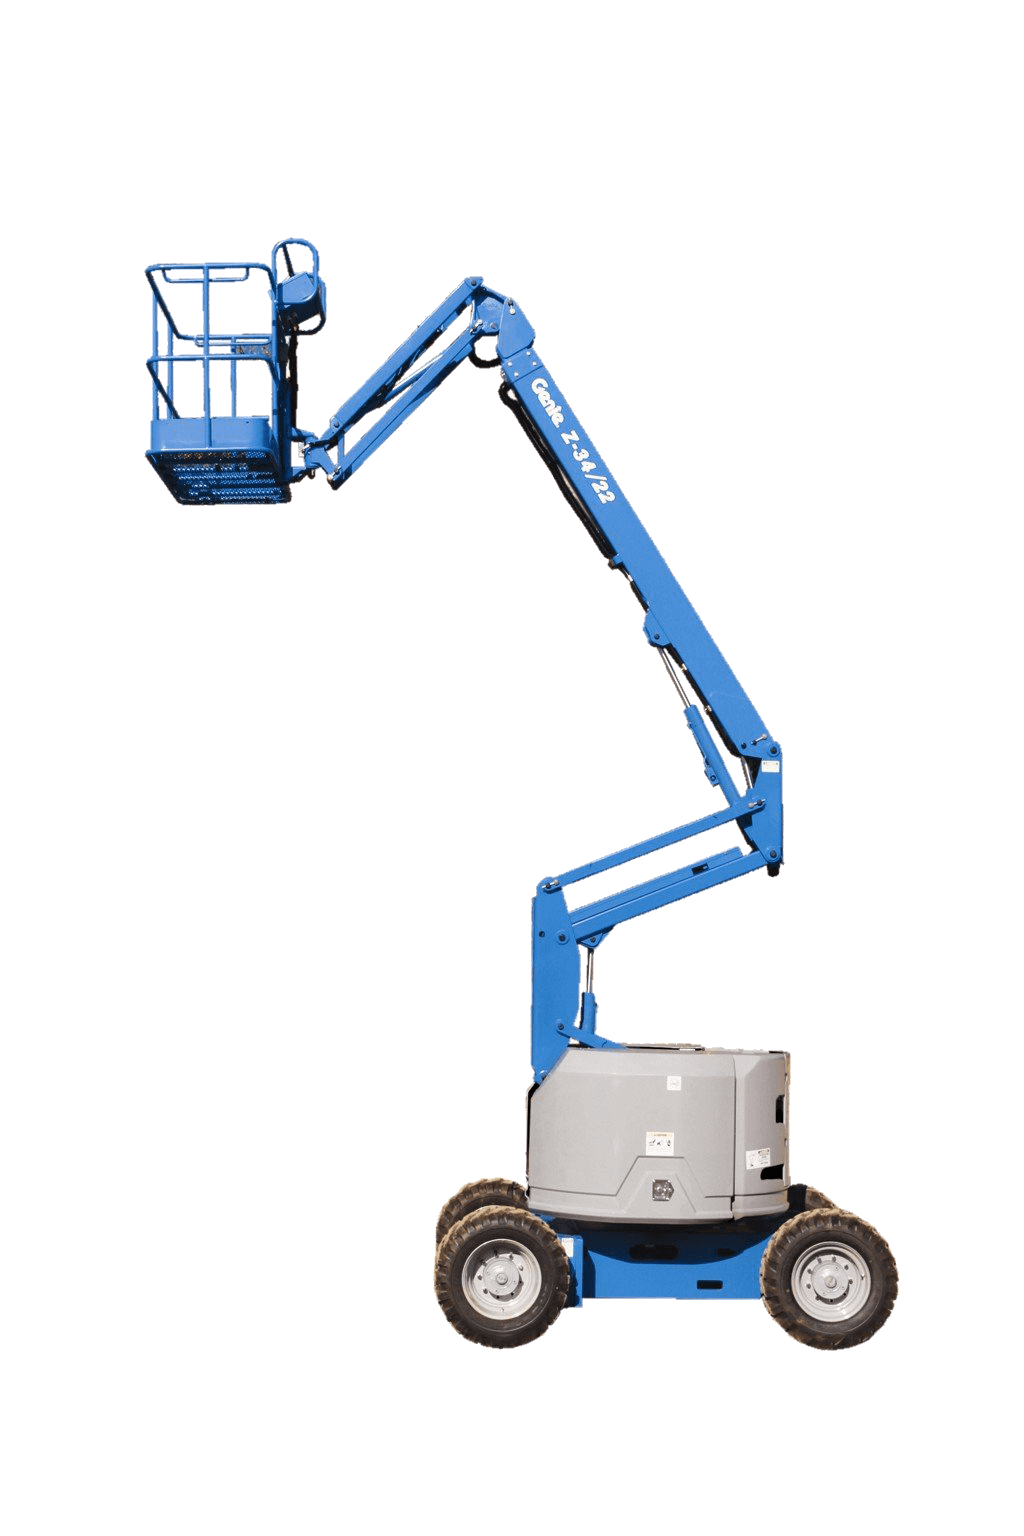 Z-34/22 ic - 10m knuckle boom lift for hire in Ballina, Gold Coast, and beyond